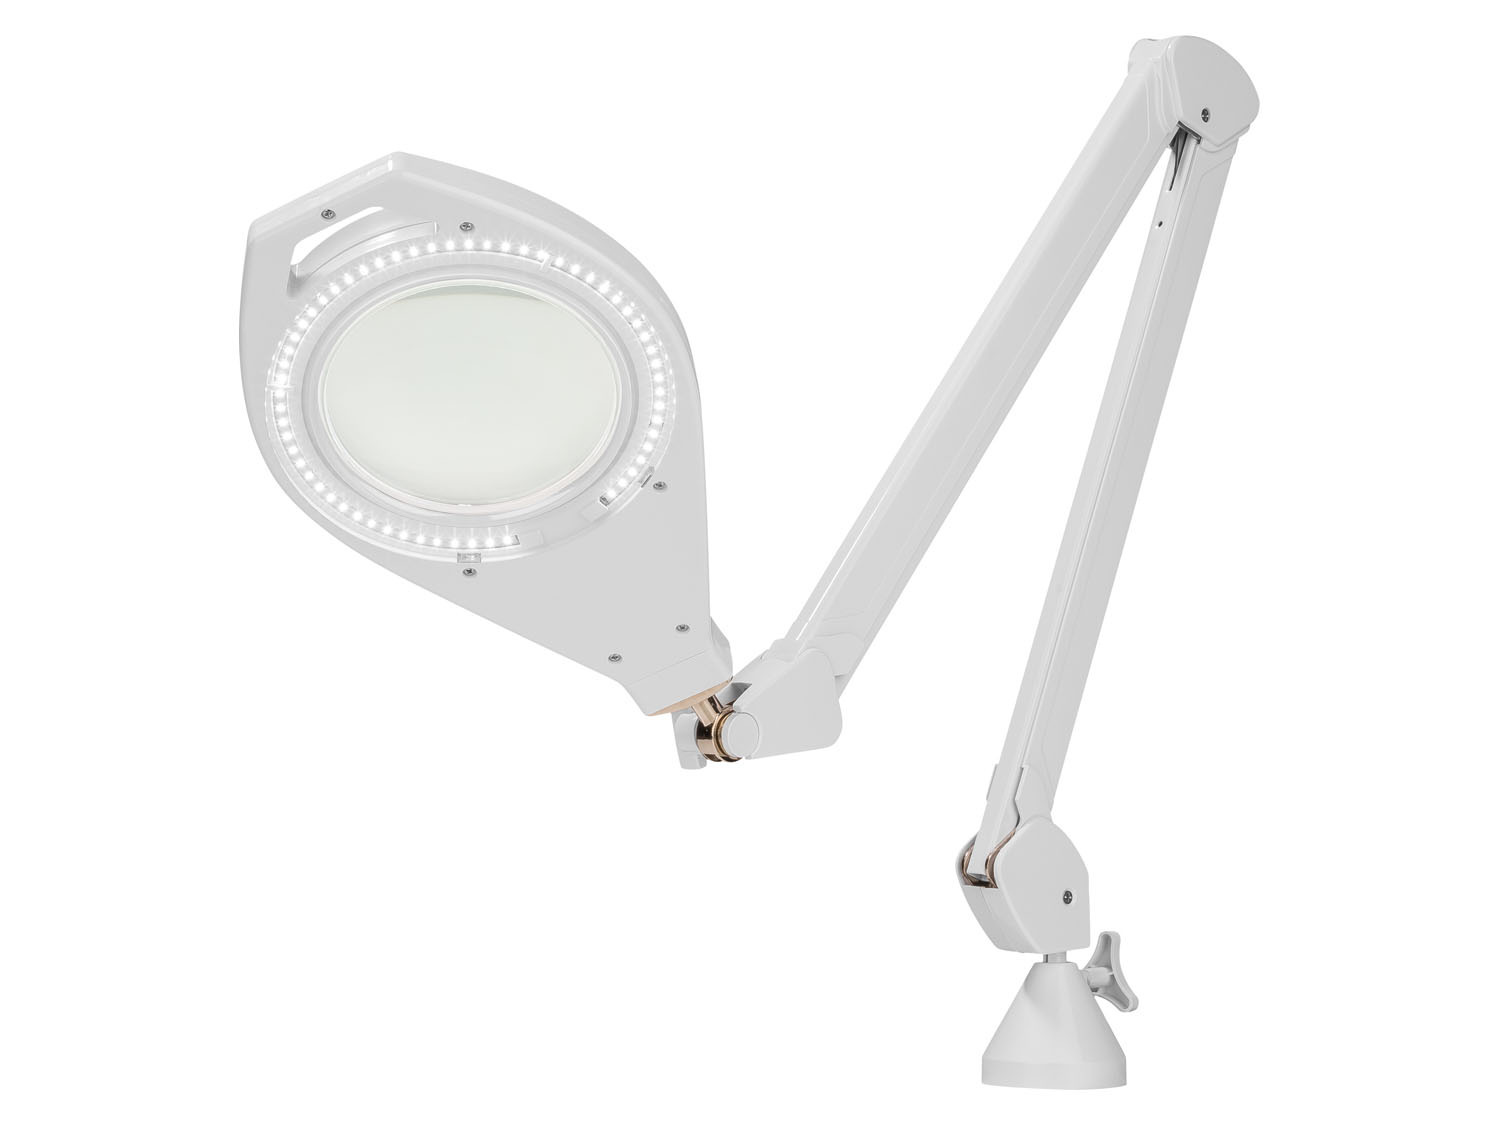 LED Lupenleuchte mit 8-facher Lupe Arbeitsleuchte Lupenlampe Lupe Licht  Lampe